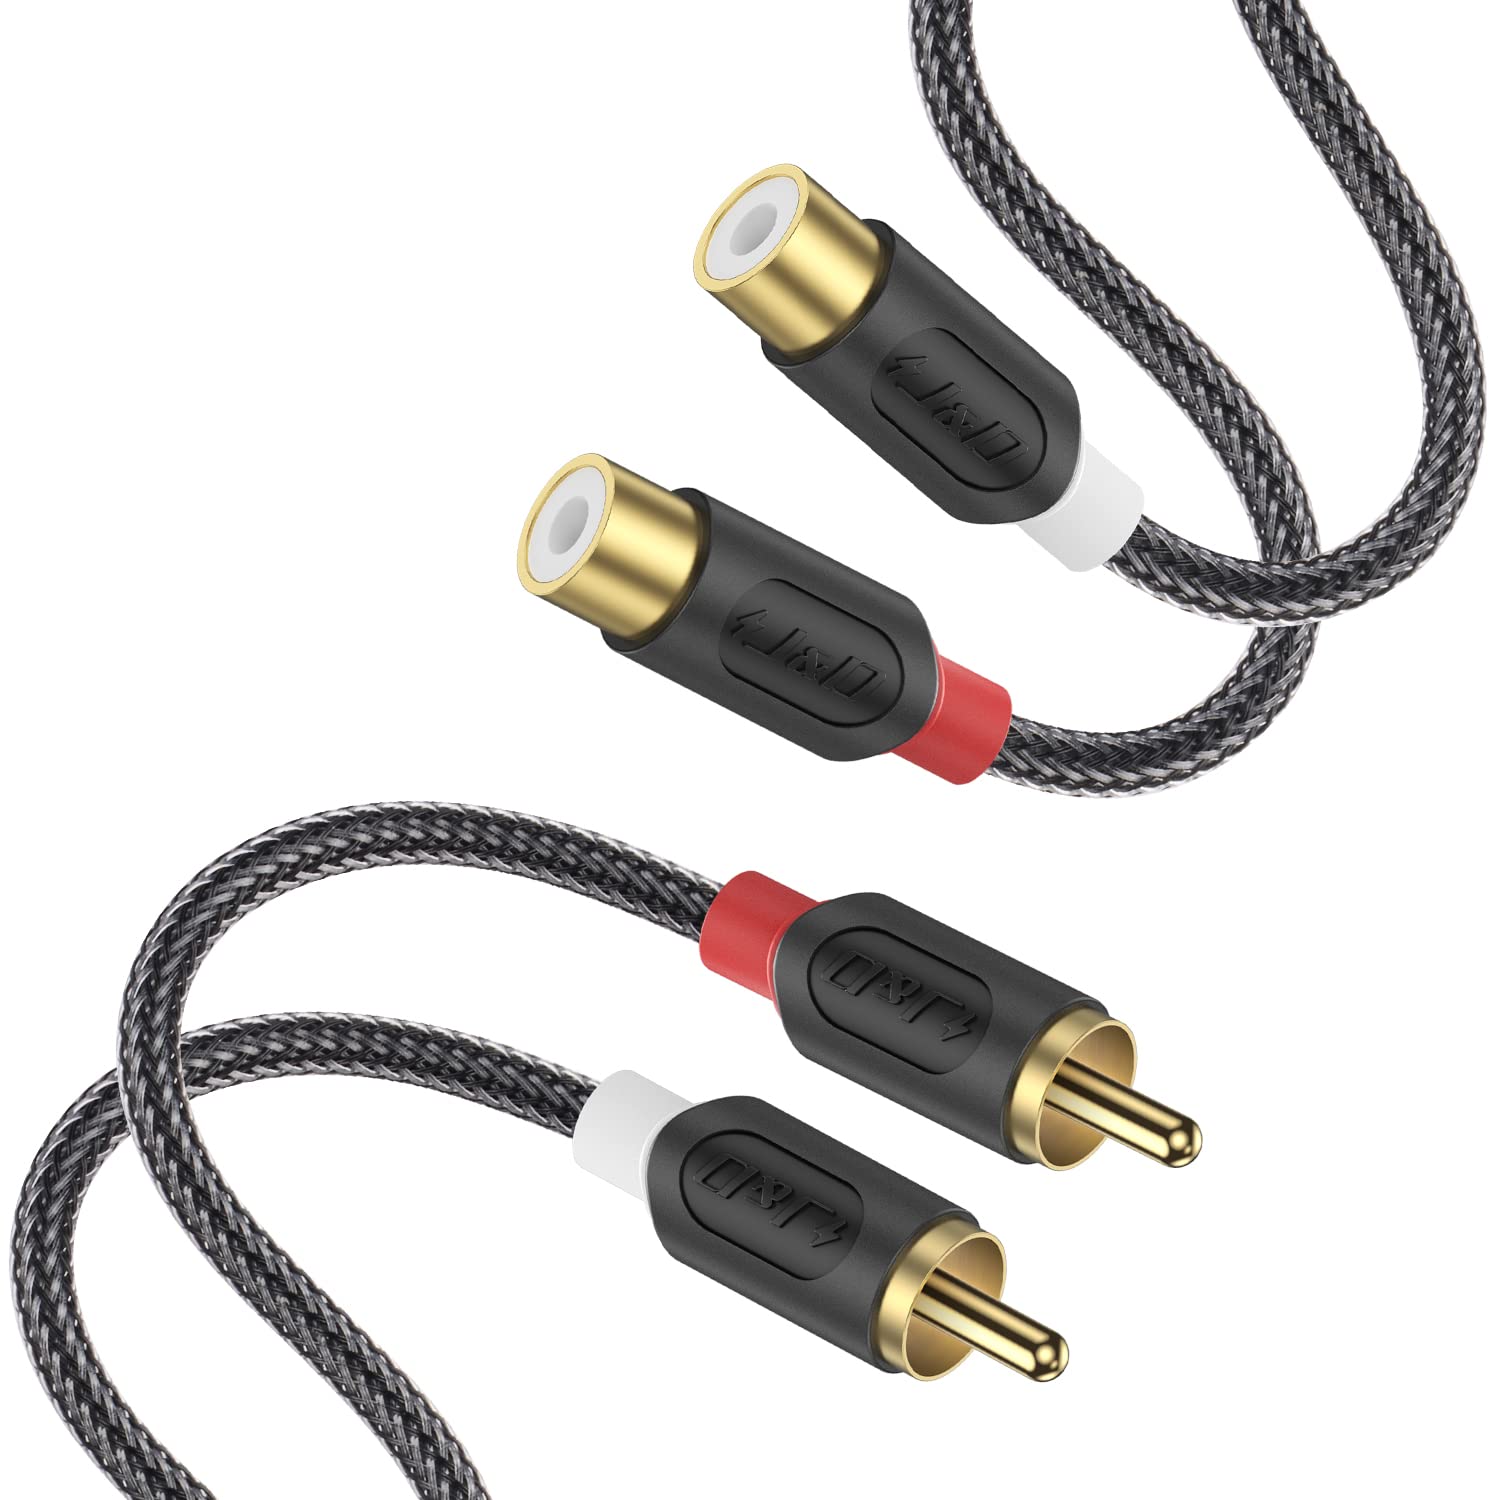 J&D Tech J&D 2 RCA Extension Cable, RCA Cable Gold Plated Audiowave Series 2 RCA Male to 2 RCA Female Stereo Audio Cable with PVC…